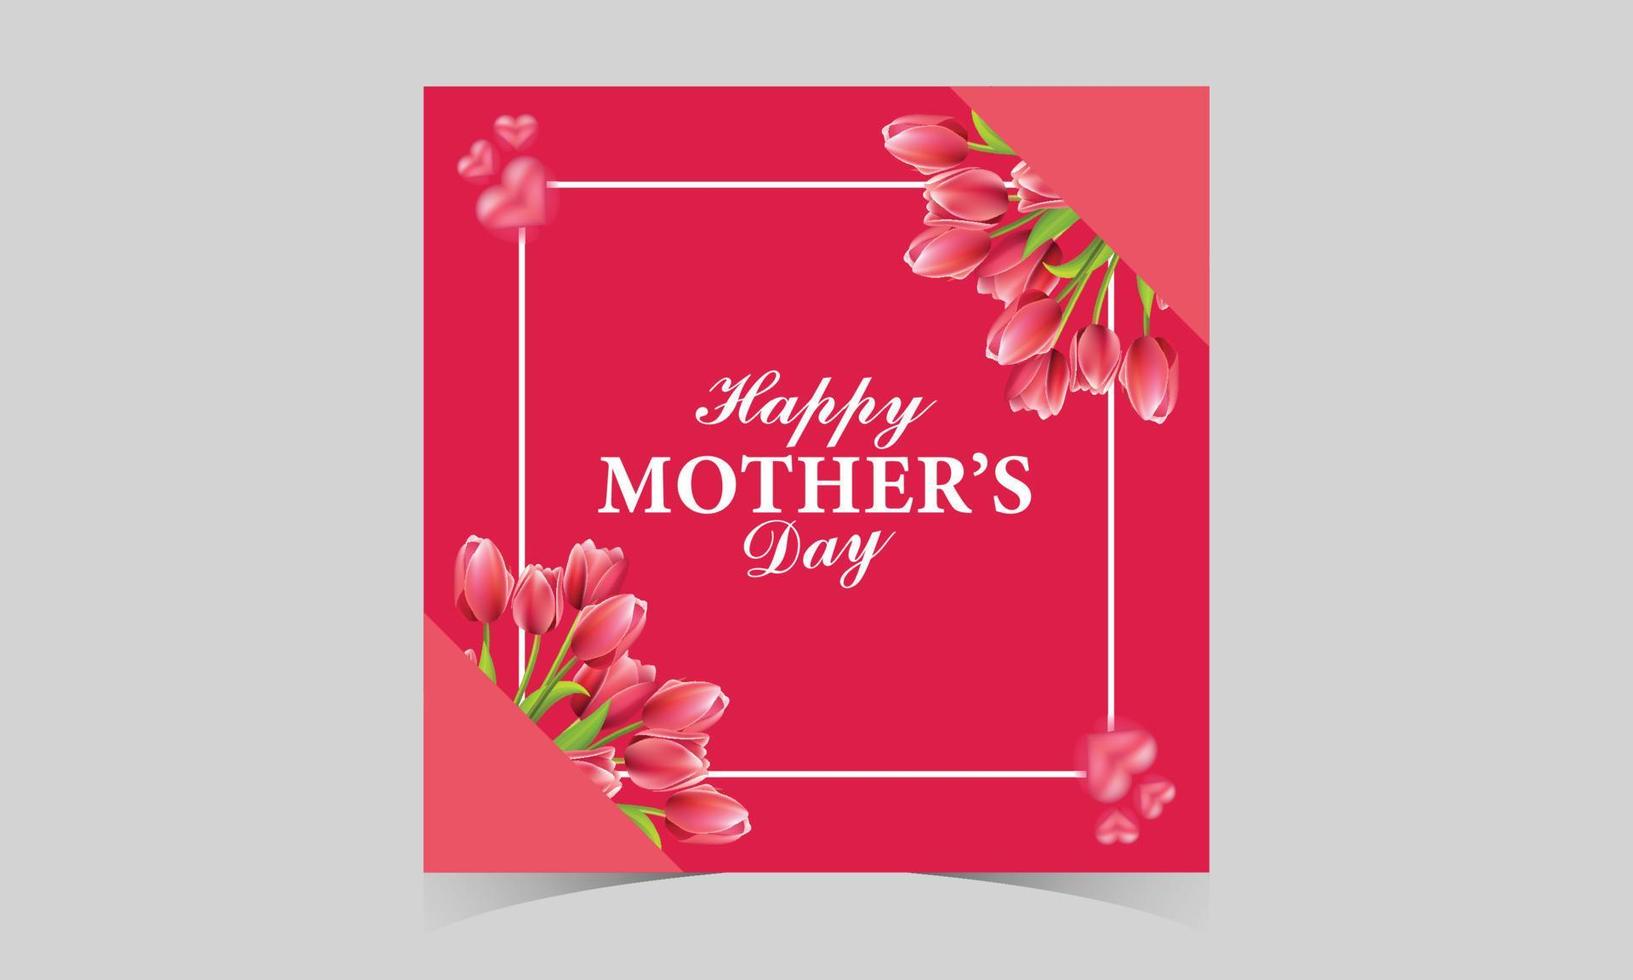 happy mother's day social media post template. mother's day social media banner. mom day greeting card. happy mother's day sign with heart and flowers. flying pink paper hearts. mom day background. vector